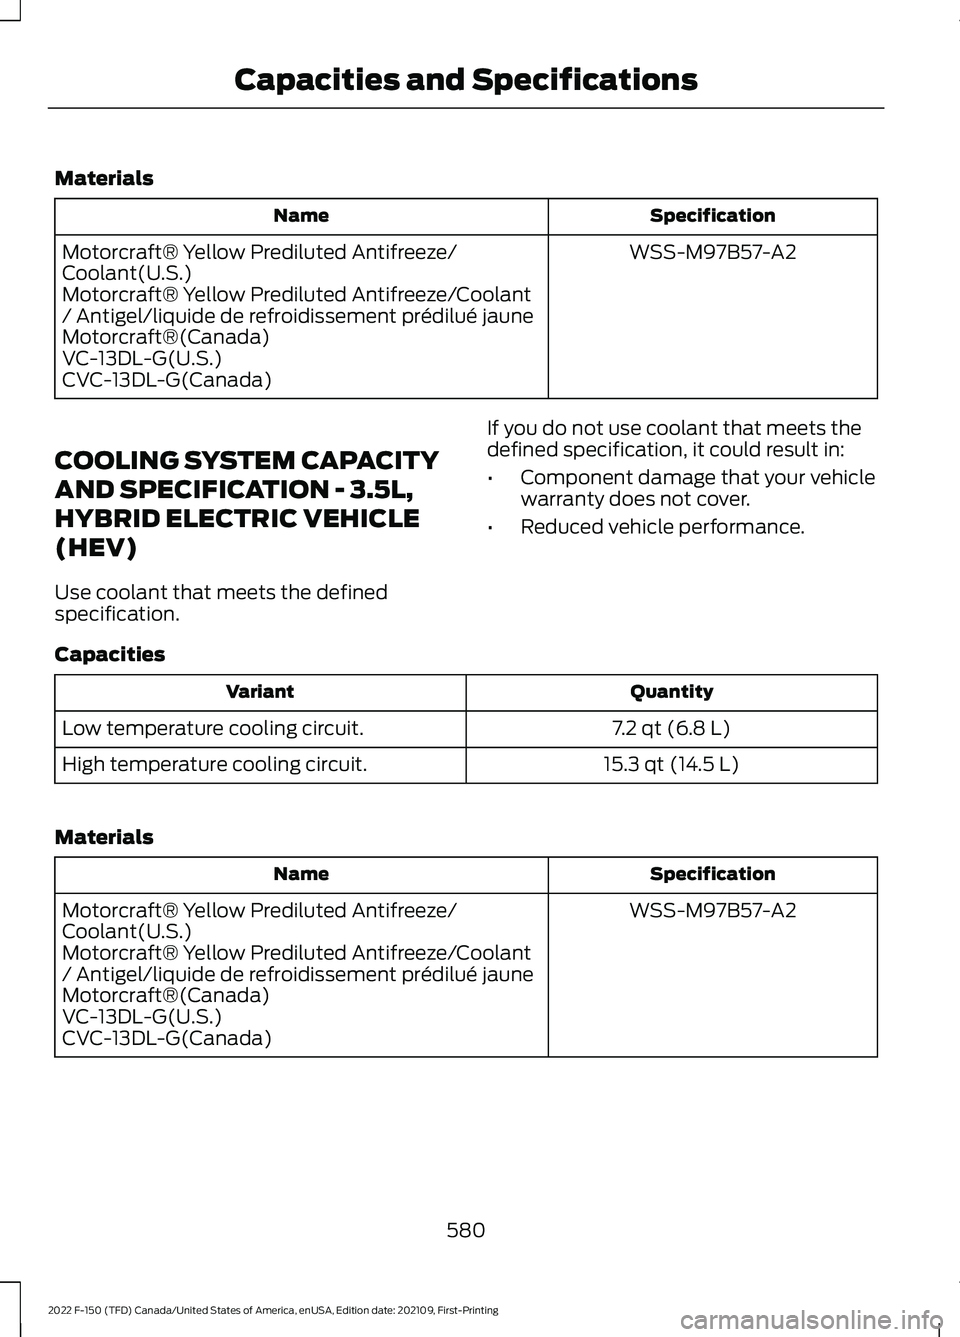 FORD F-150 2022  Owners Manual Materials
Specification
Name
WSS-M97B57-A2
Motorcraft® Yellow Prediluted Antifreeze/
Coolant(U.S.)
Motorcraft® Yellow Prediluted Antifreeze/Coolant
/ Antigel/liquide de refroidissement prédilué ja